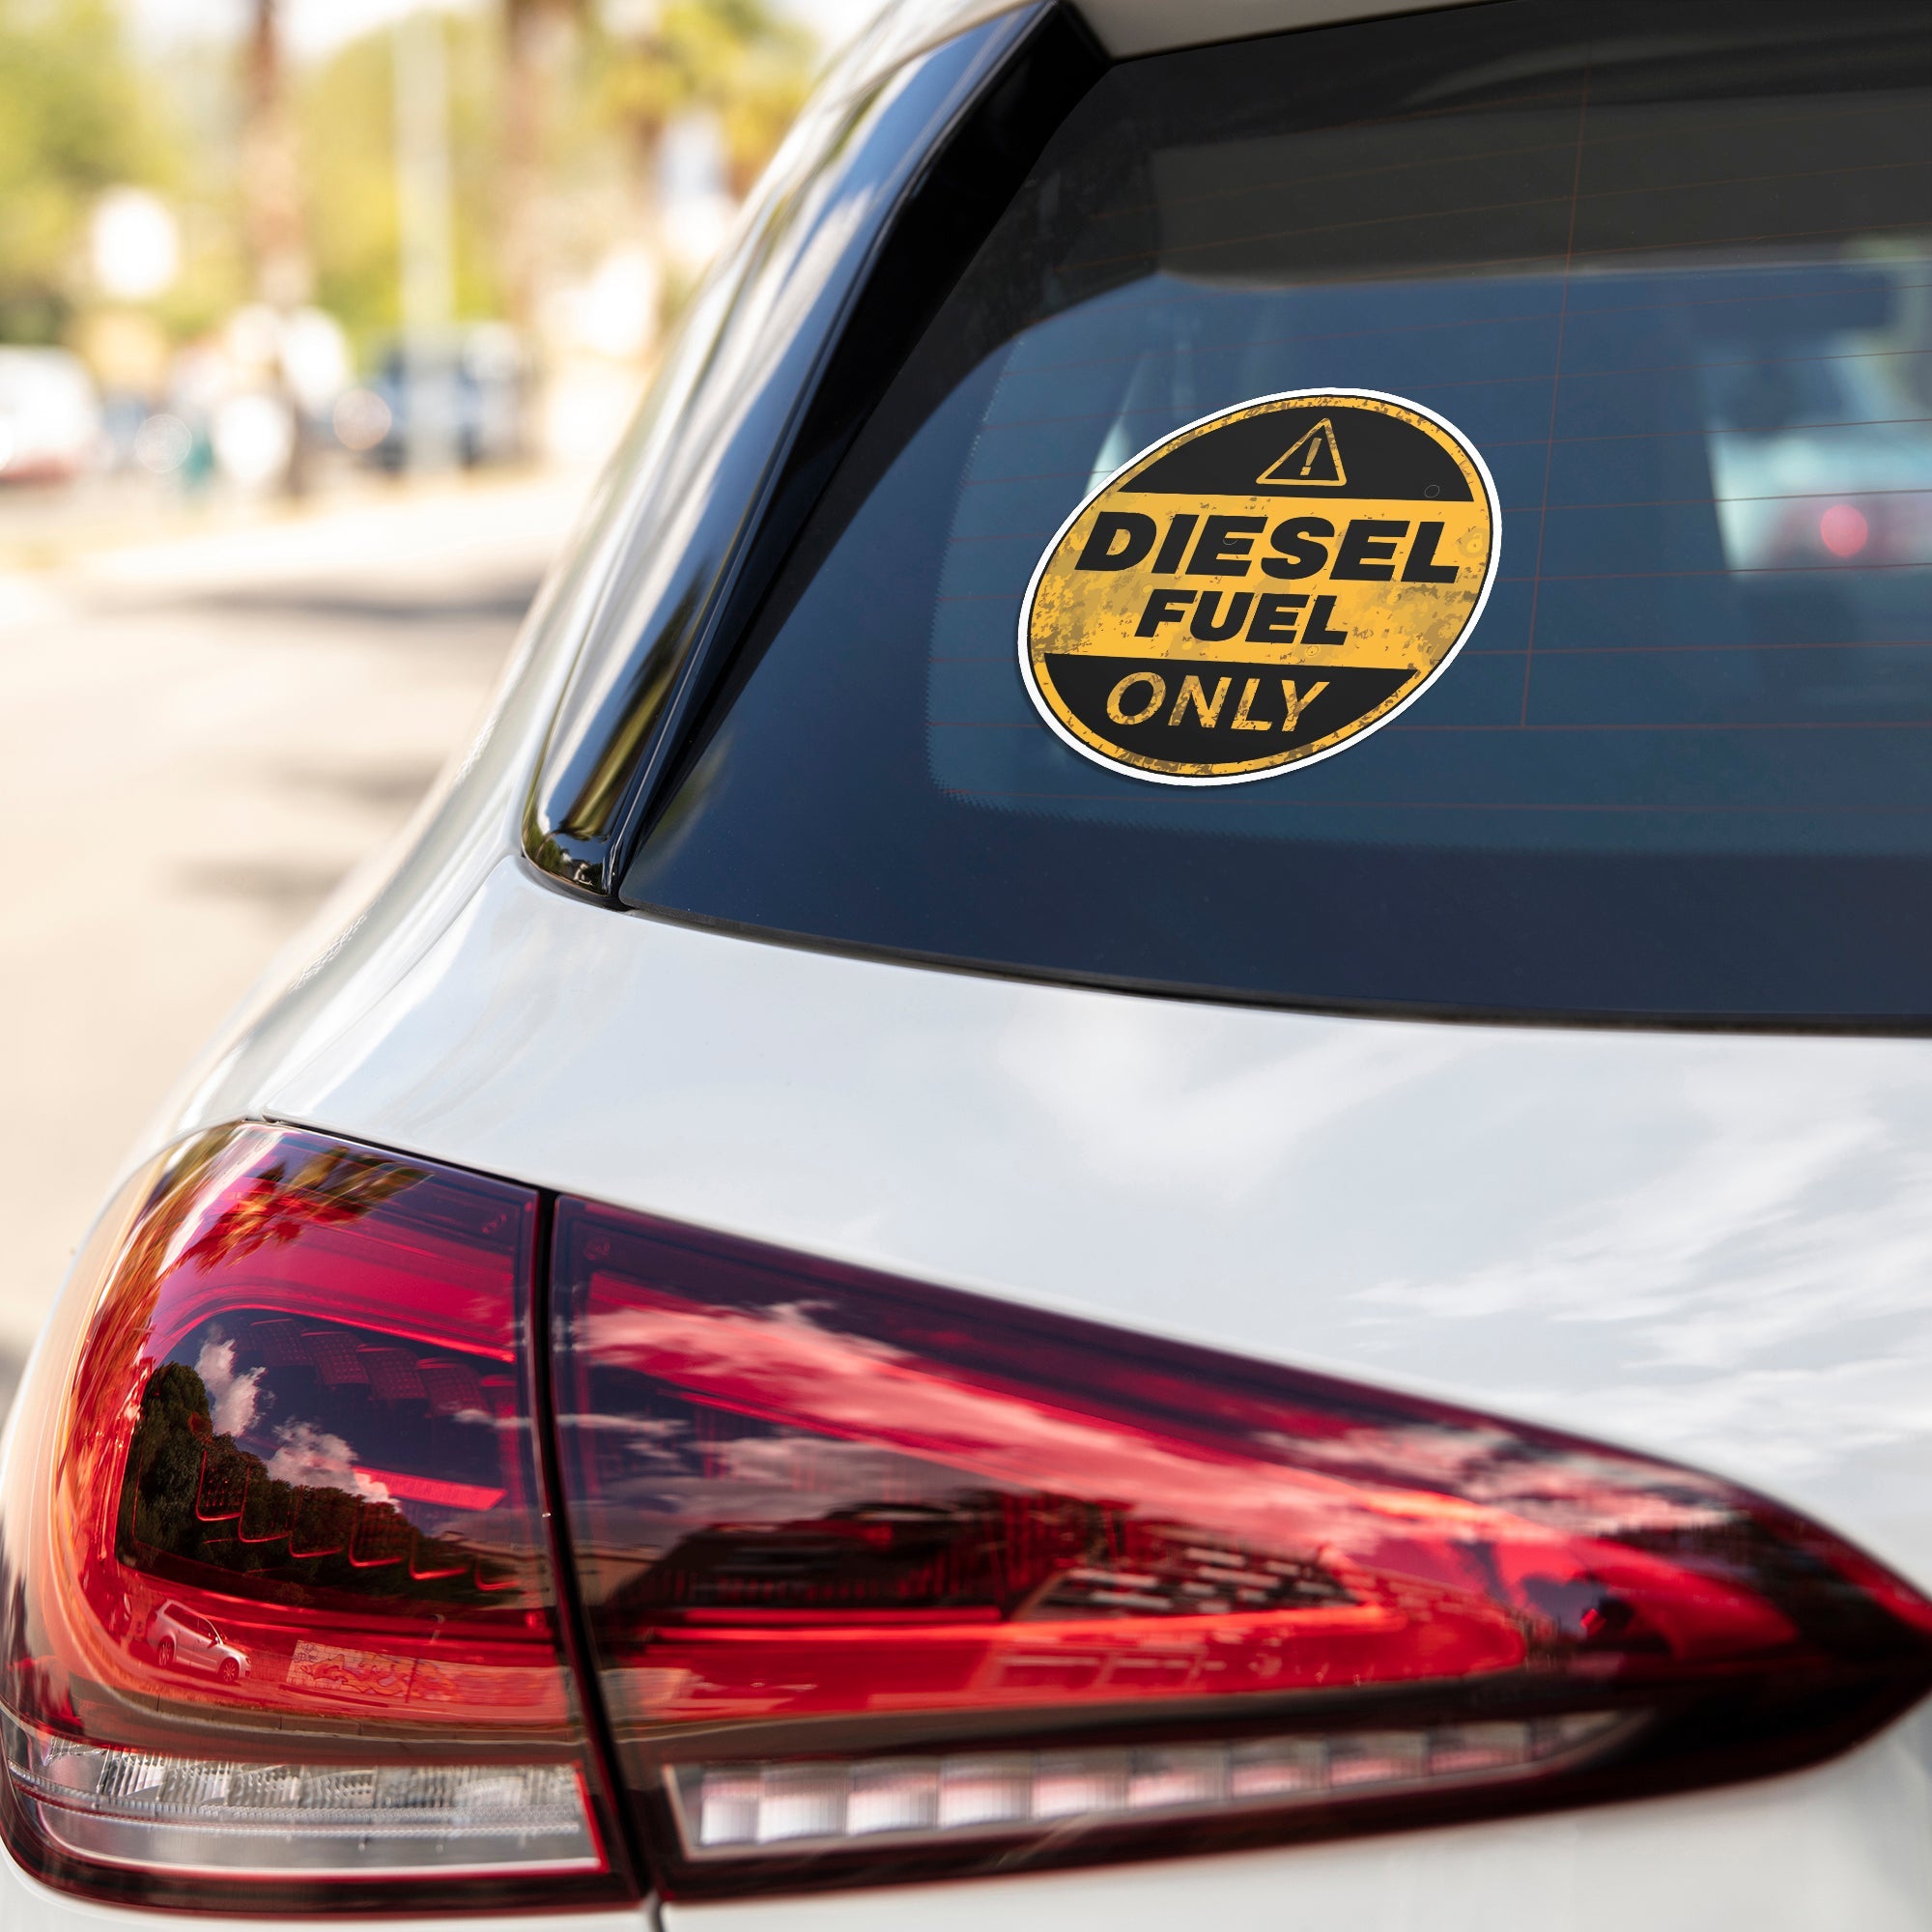 Diesel Fuel Only Cars & Bikes Stickers